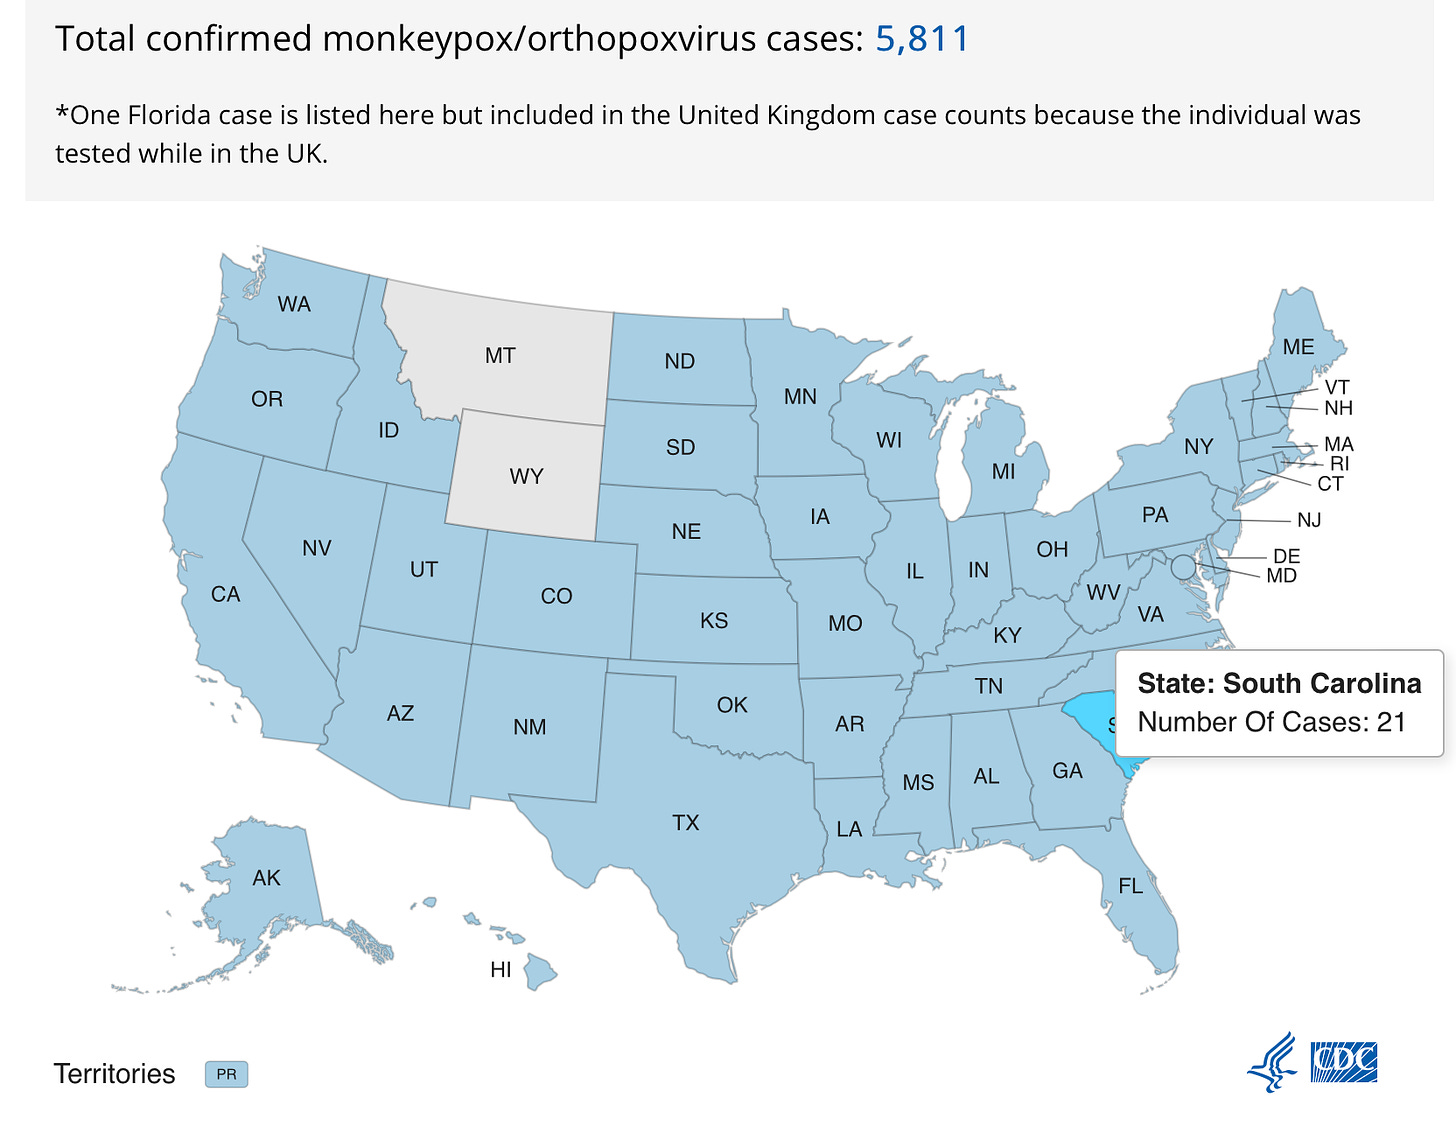 Centers for Disease Control and Prevention map of monkeypox cases. South Carolina has 21 cases and the U.S. as a whole has 5,811.